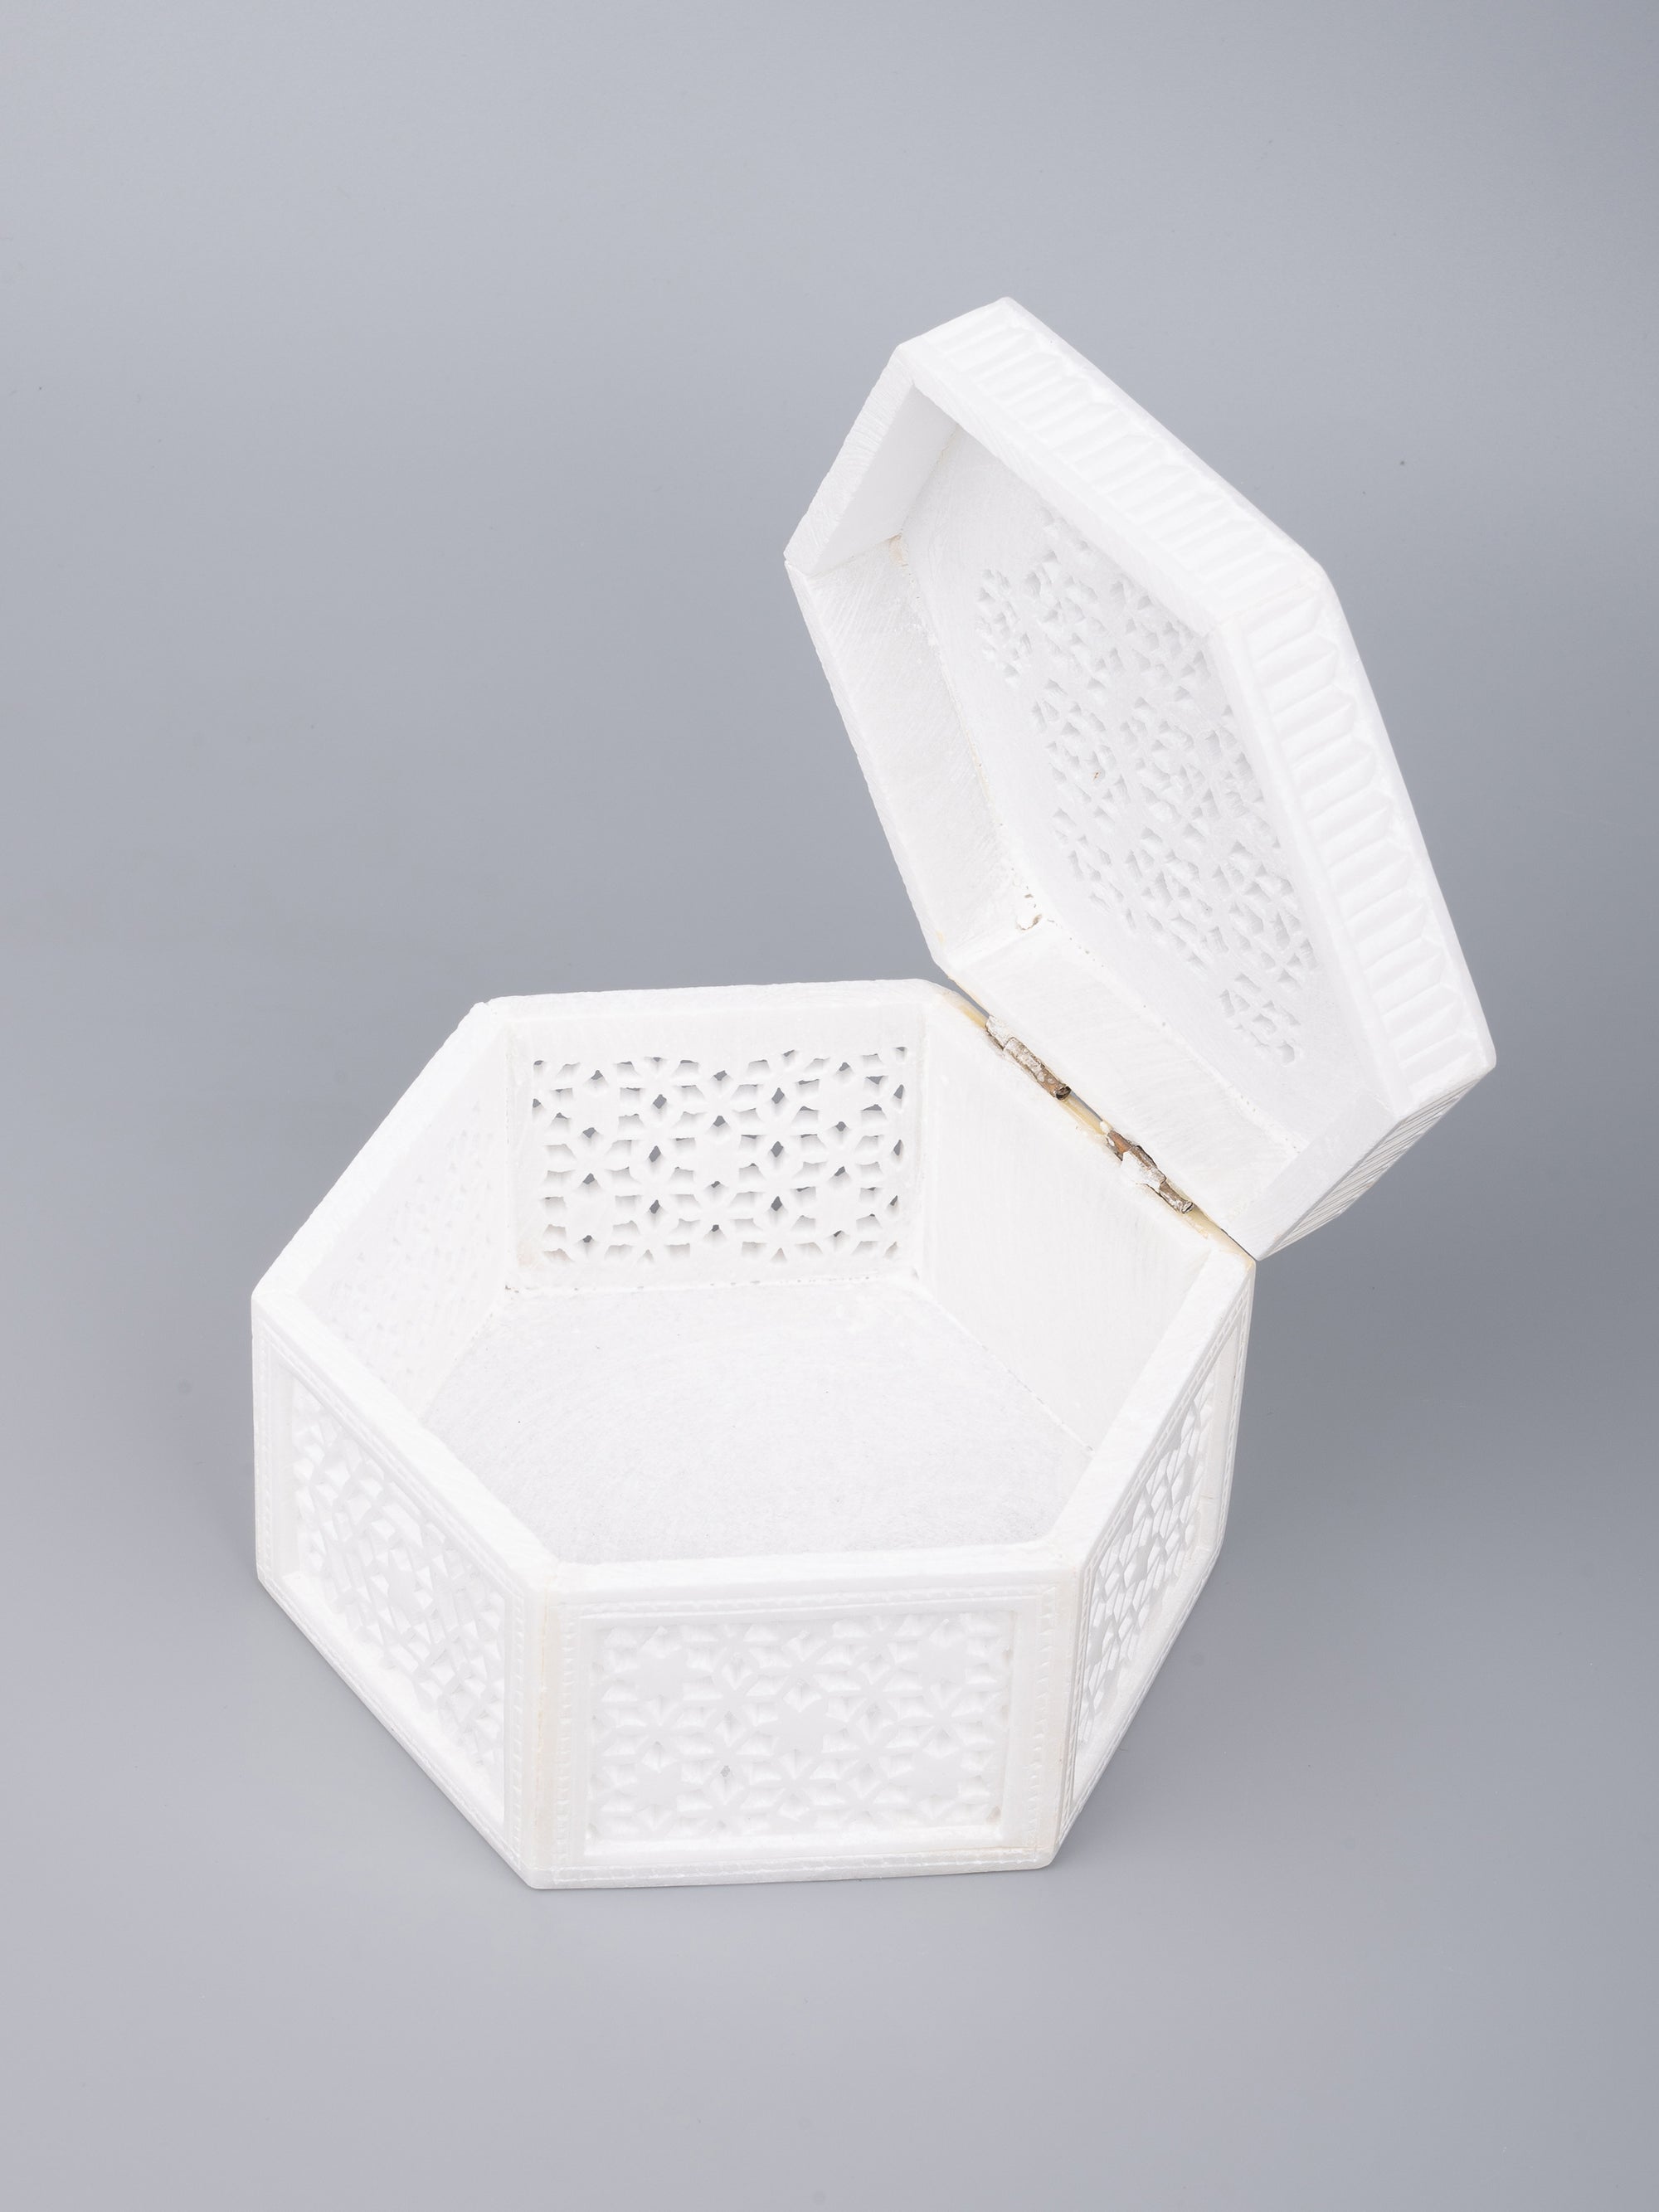 White marble crafted jewelry box in hexagonal shape - The Heritage Artifacts